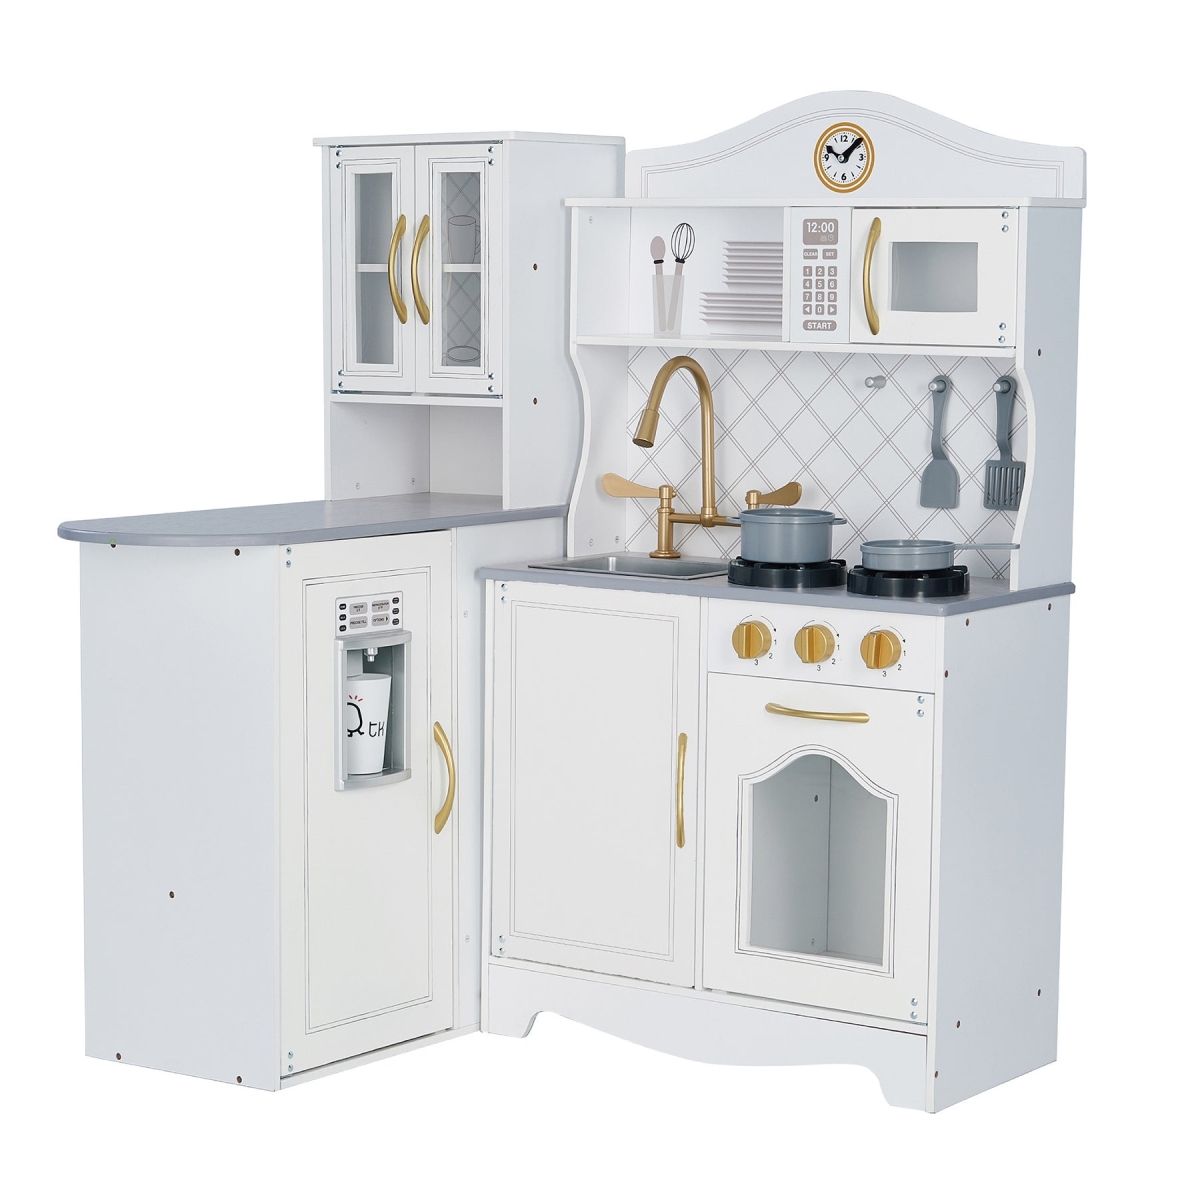 Picture of Teamson TD-13119D Kids Little Chef Upper East Retro Play Kitchen with Effects, White